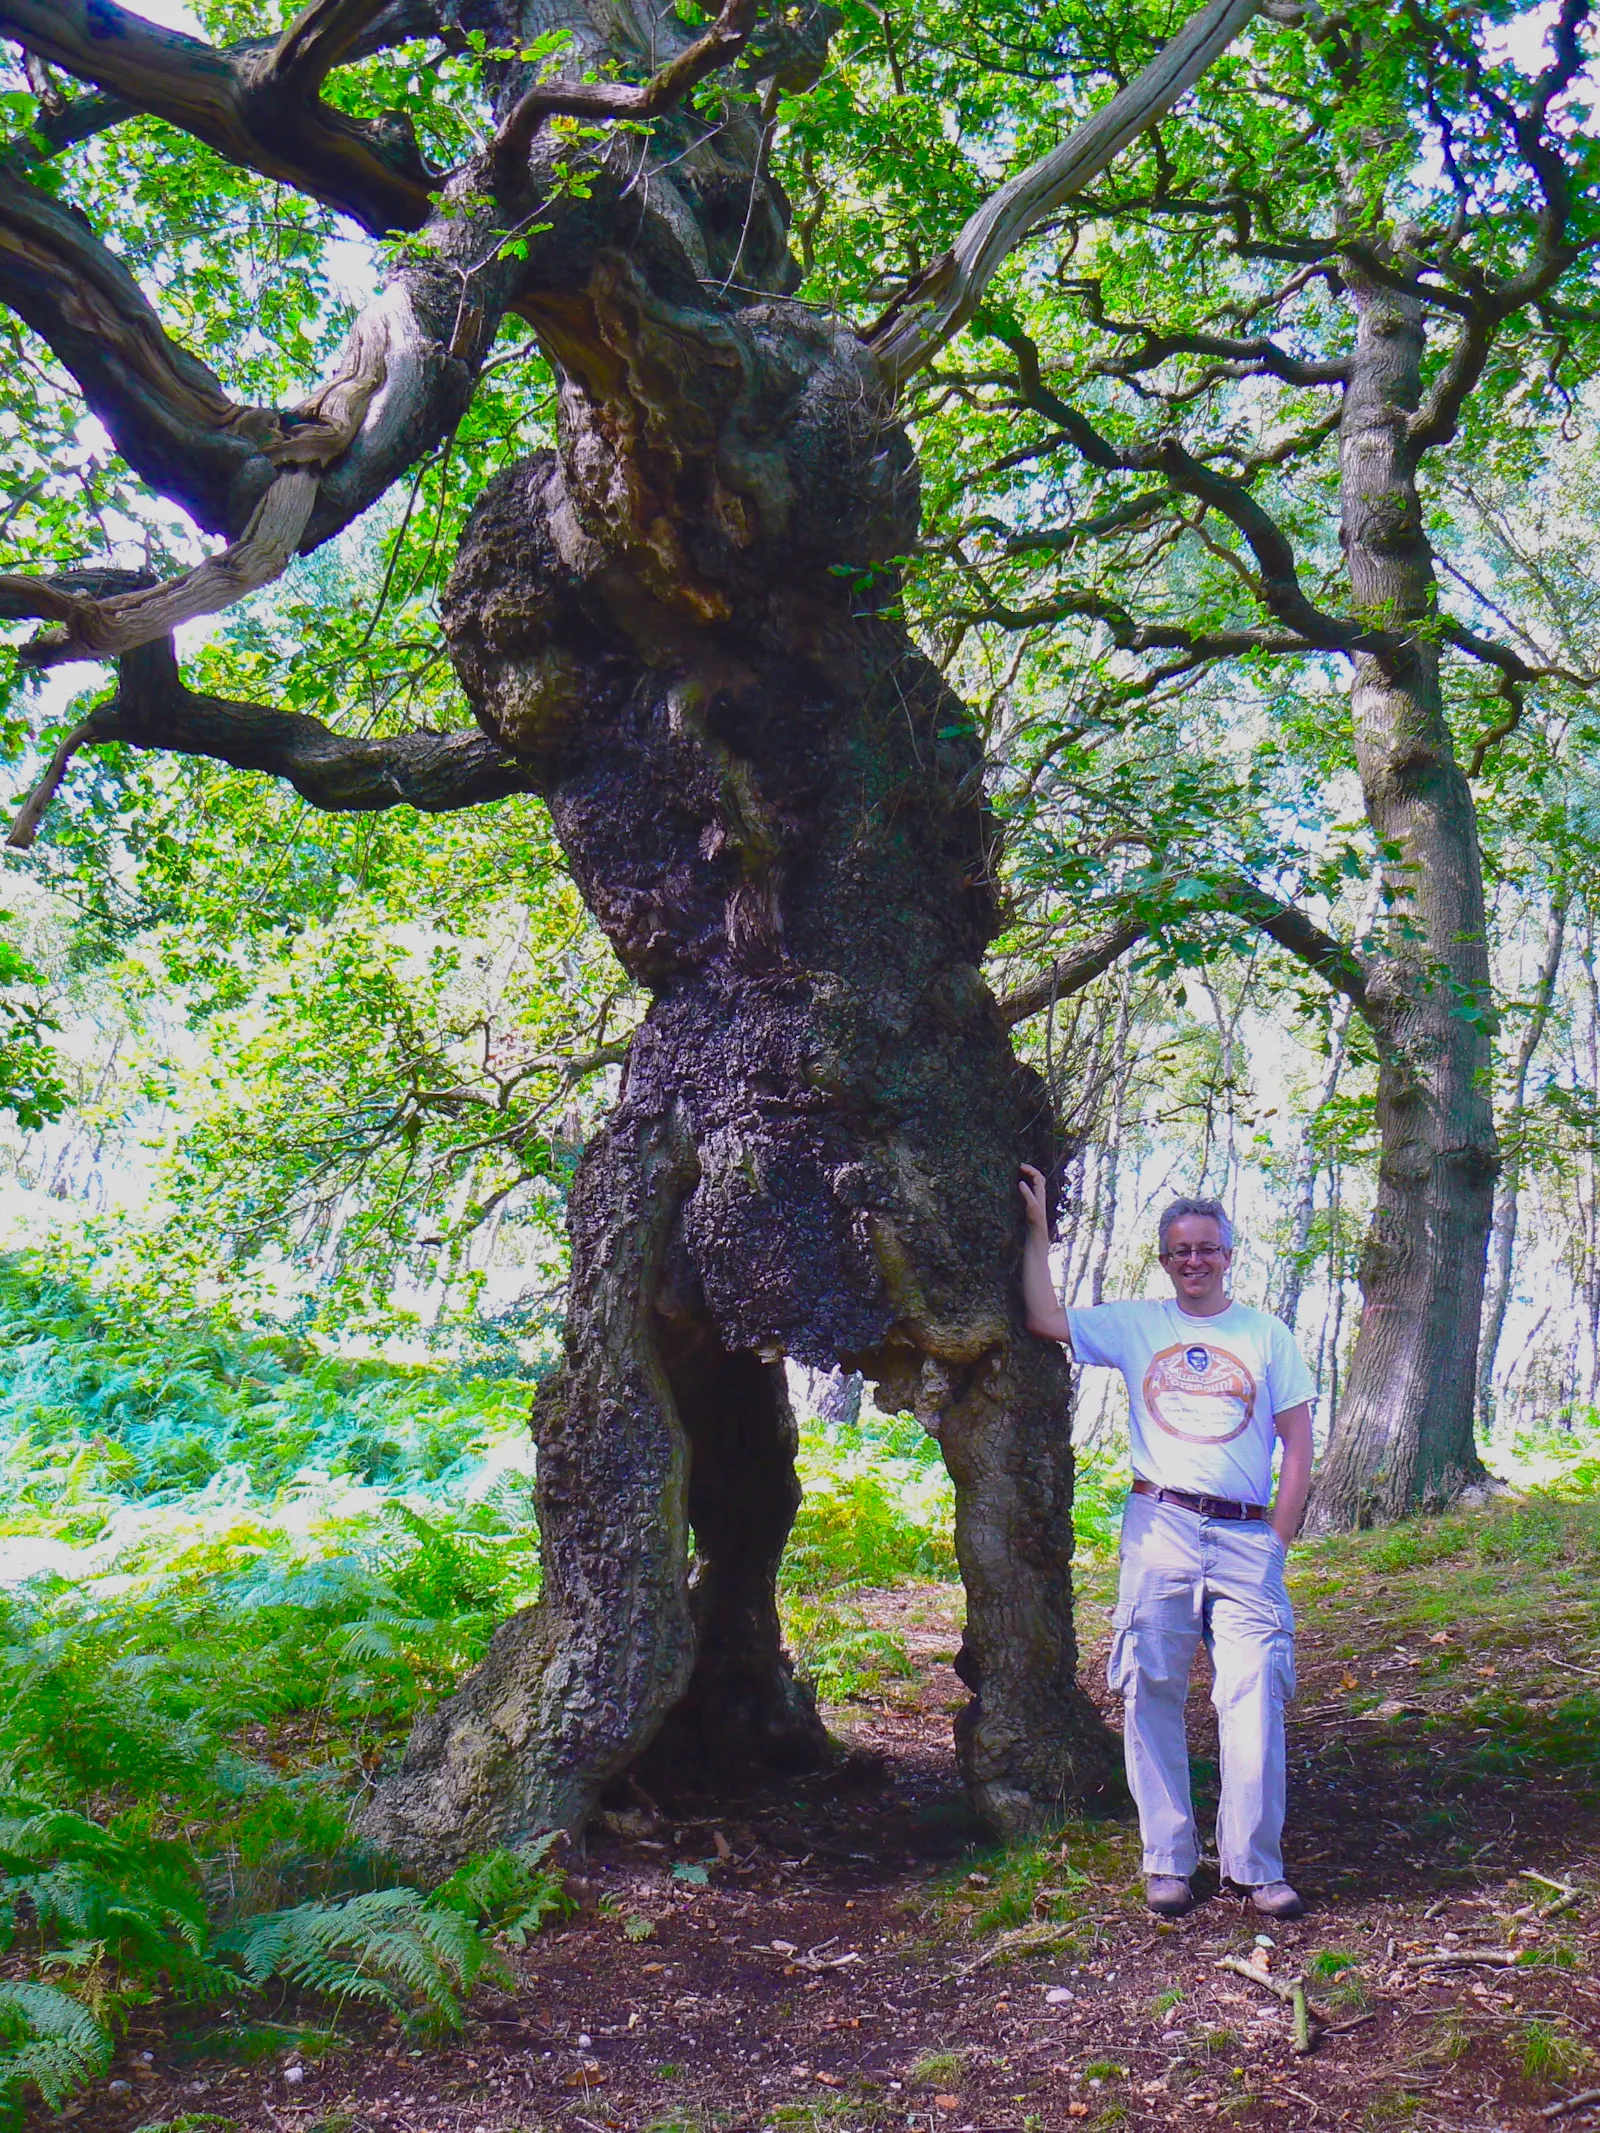 John Garth photographed (with Ent) on Cannock Chase, Staffordshire, by Scott Whitehouse